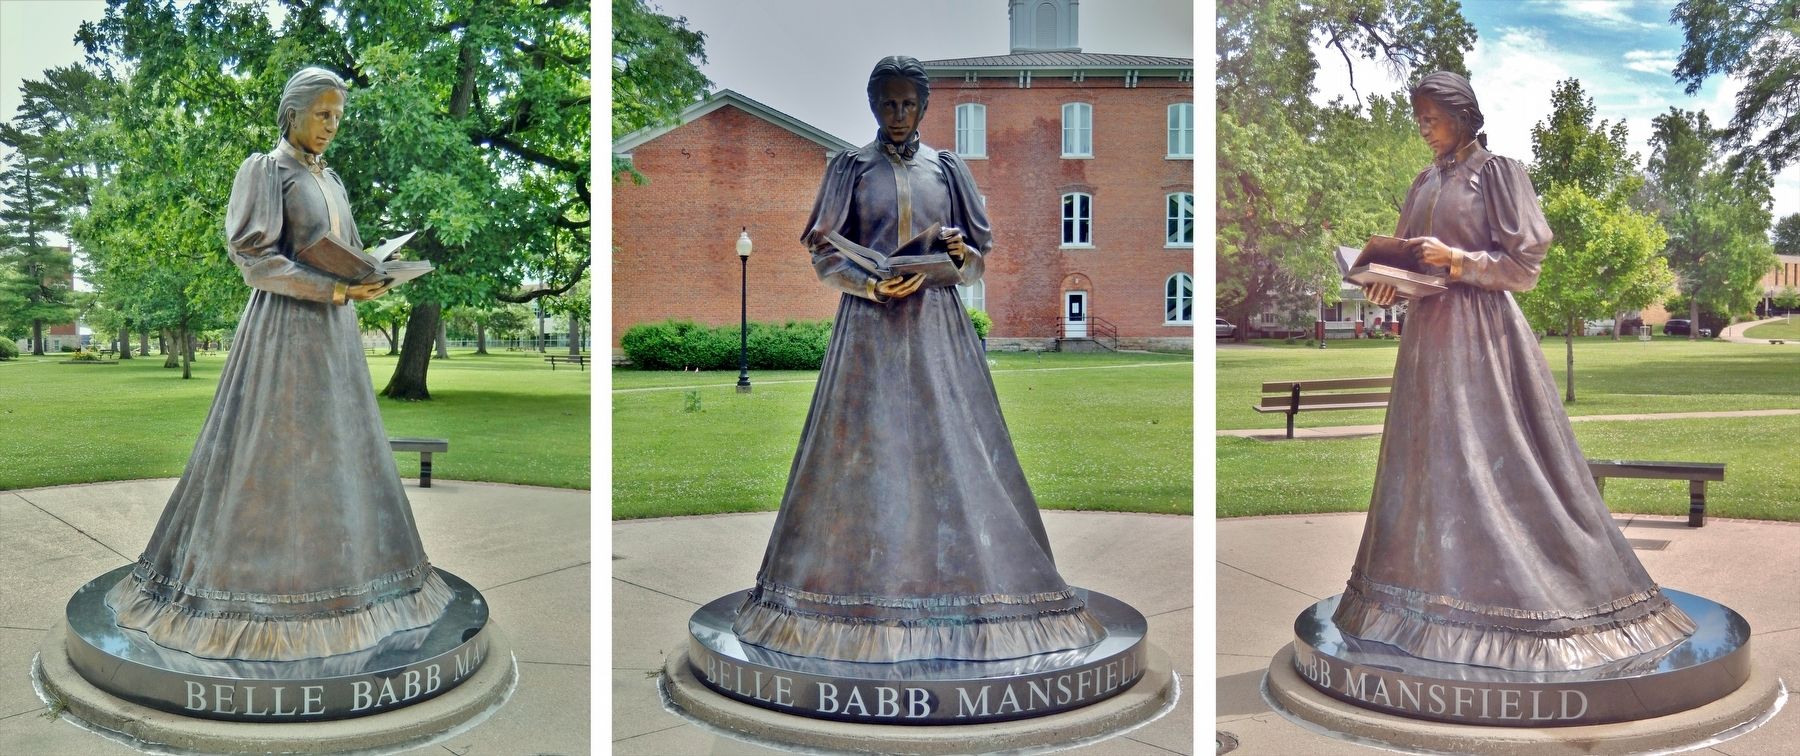 Belle Babb Mansfield Sculpture<br>(<i>by Benjamin Victor</i>) image. Click for full size.